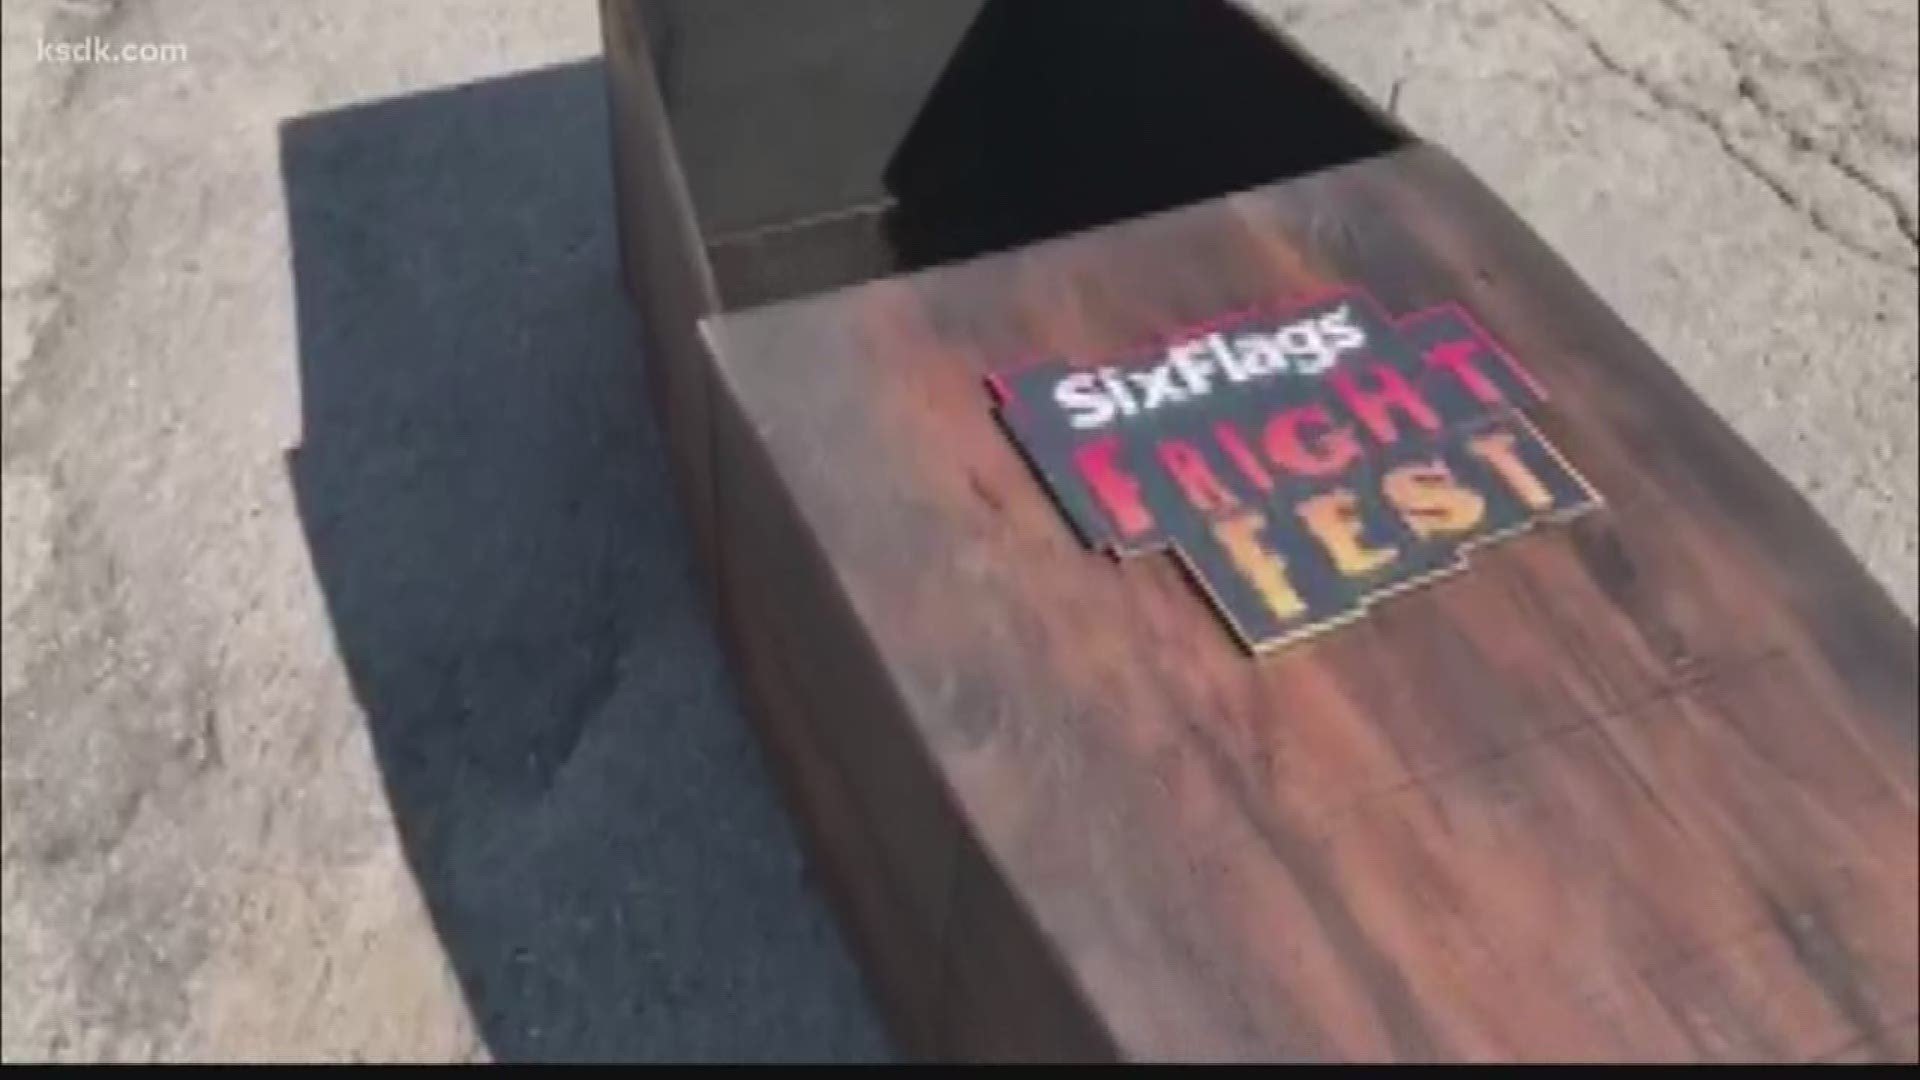 Meet the 6 people who will spend 30 hours in a coffin at Six Flags | www.ermes-unice.fr